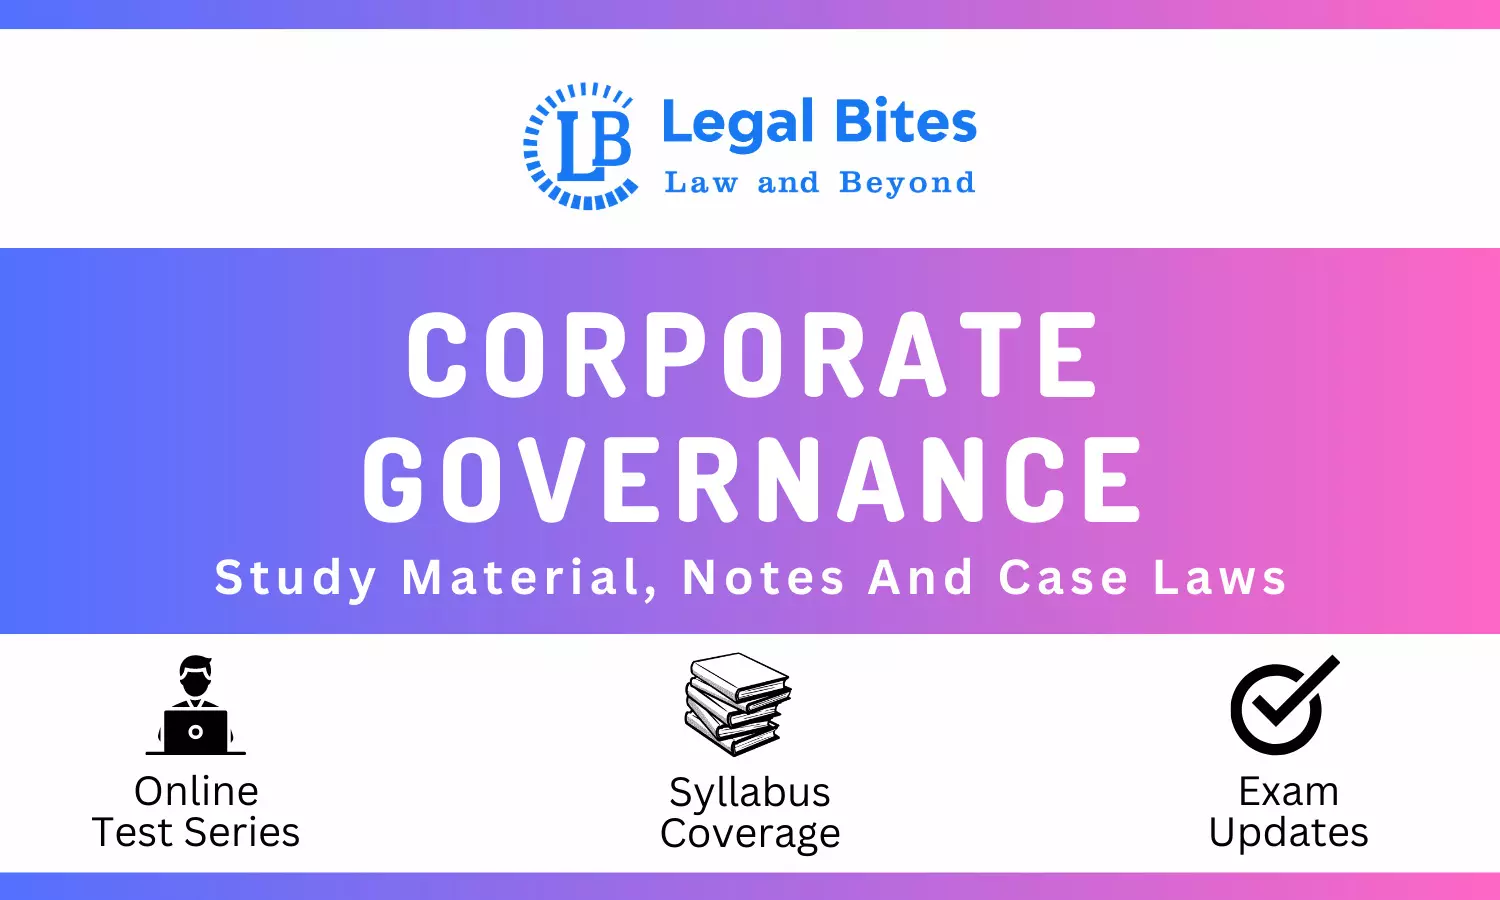 Corporate Governance - Notes, Case Laws And Study Material